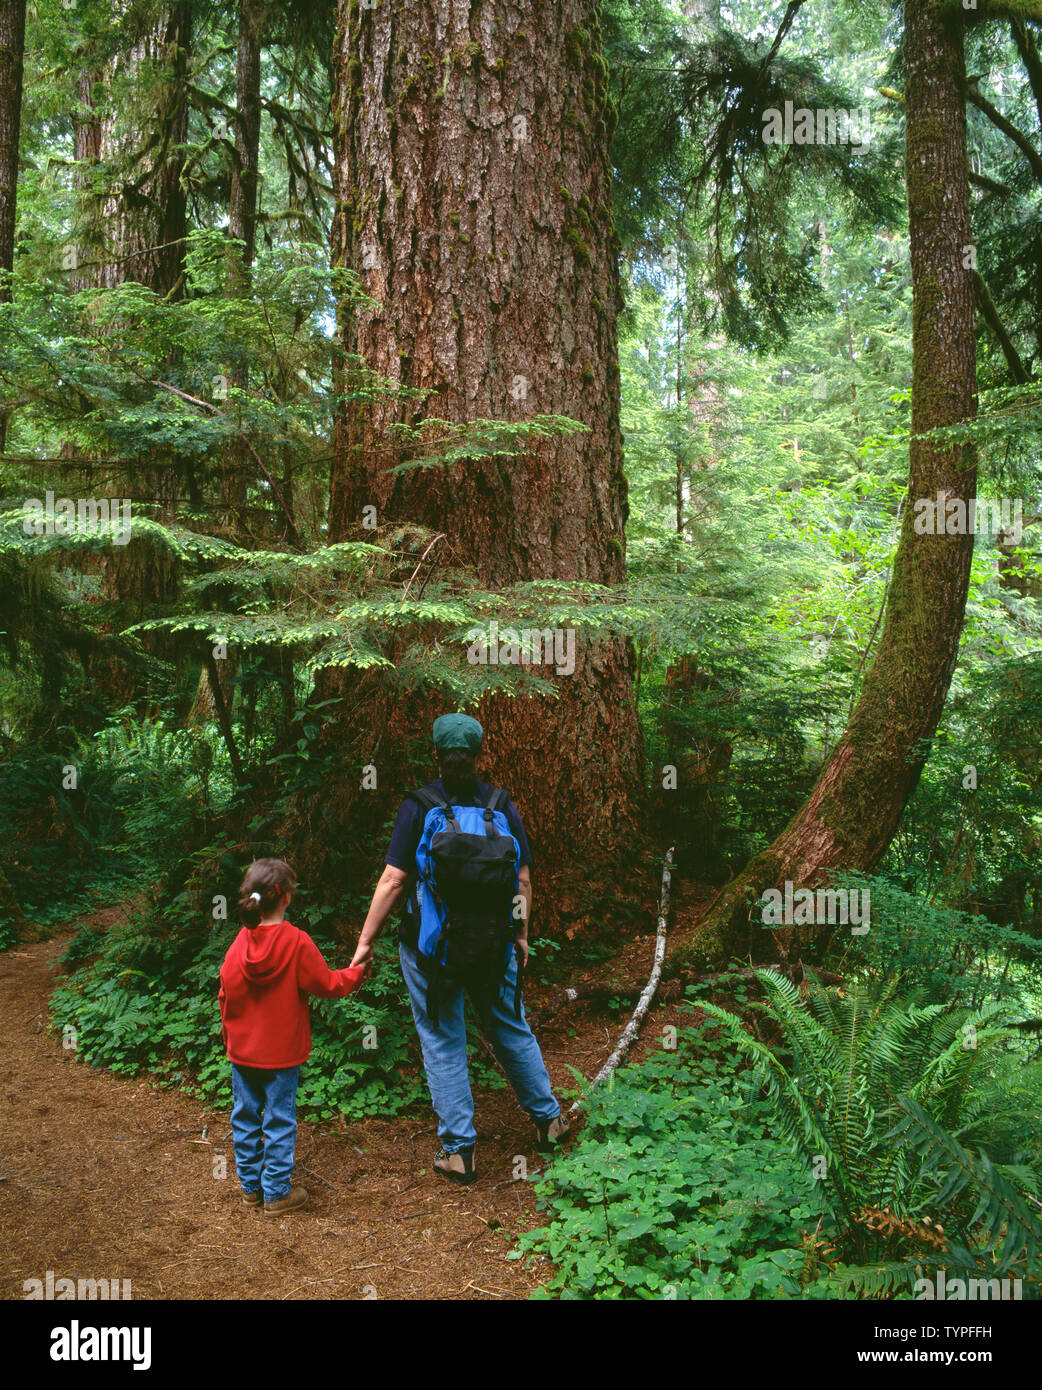 USA, Washington, Olympic National Park, Mother and daughter pause while hiking to view temperate rain forest in the Quinault Valley. Stock Photo